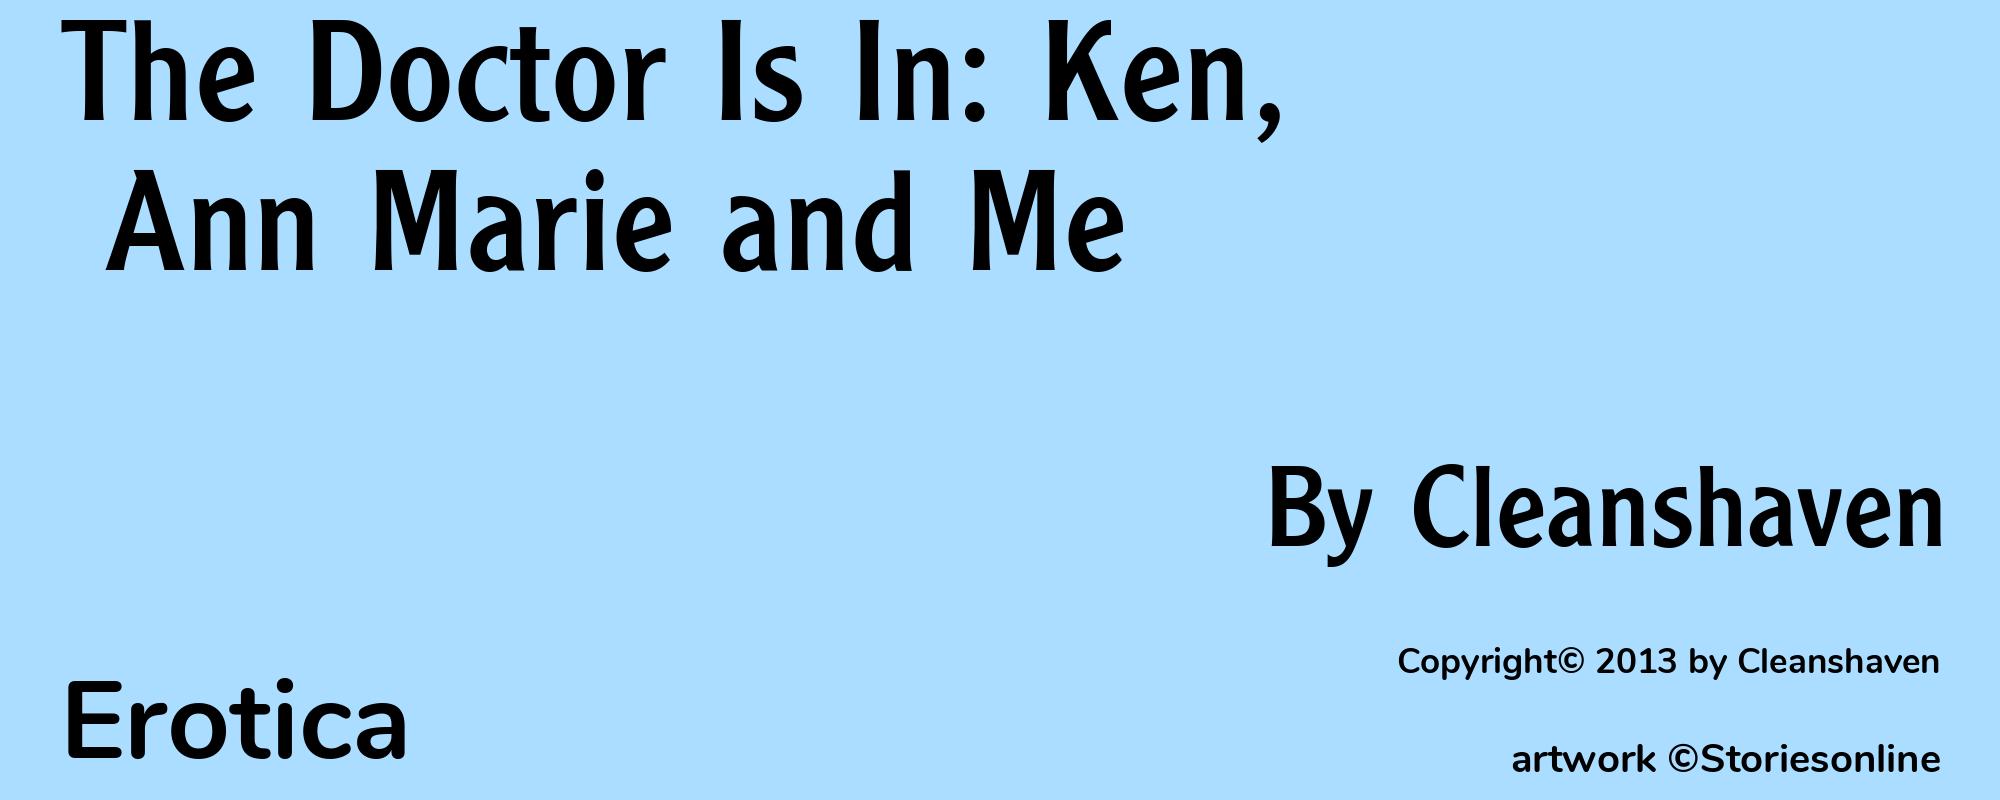 The Doctor Is In: Ken, Ann Marie and Me - Cover